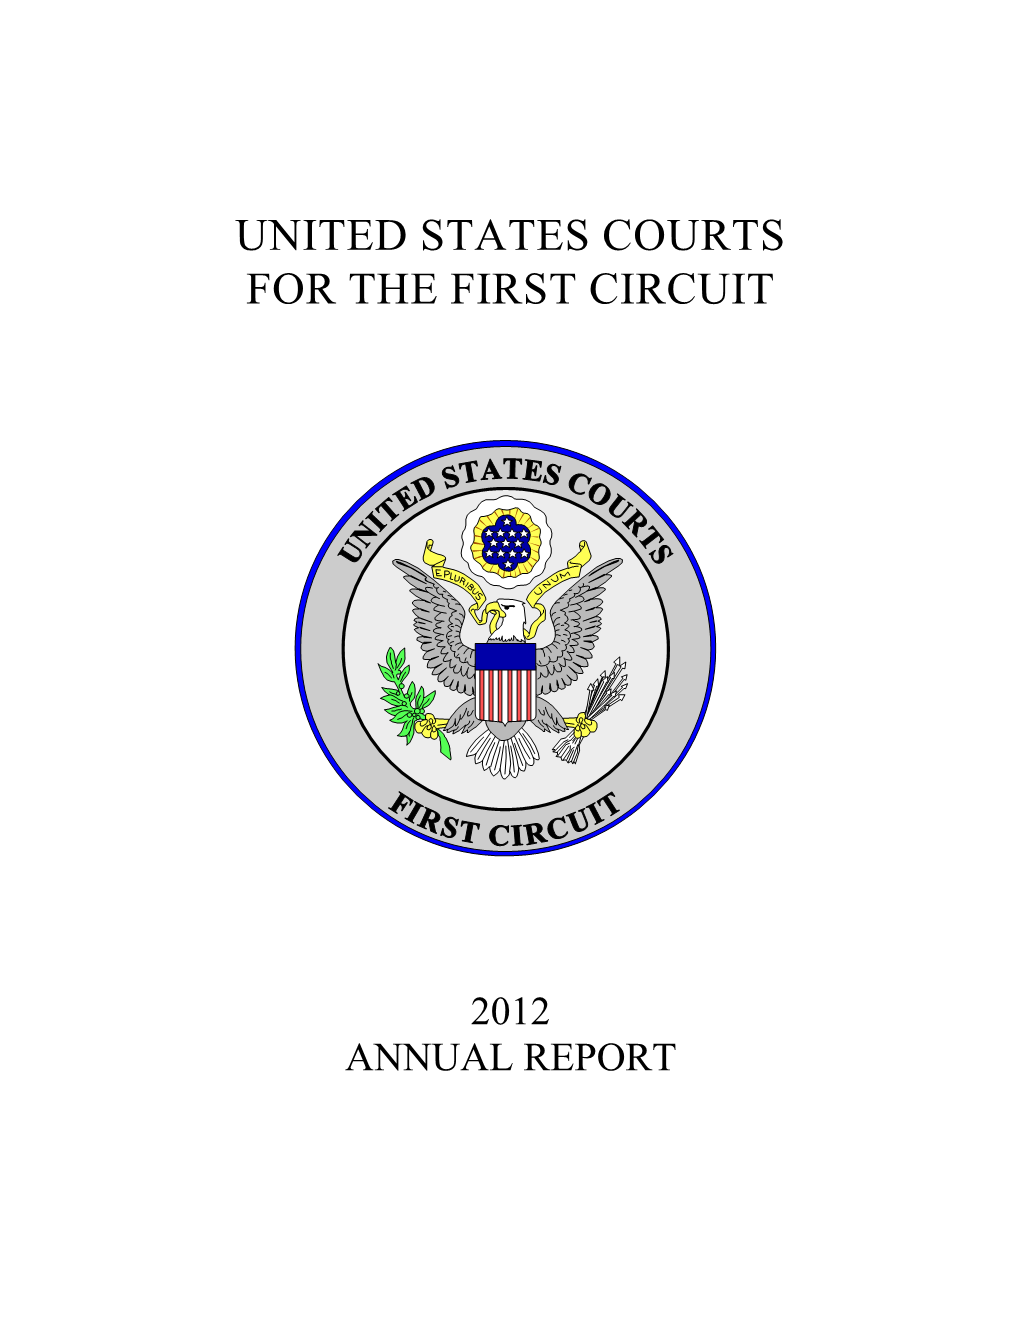 United States Courts for the First Circuit